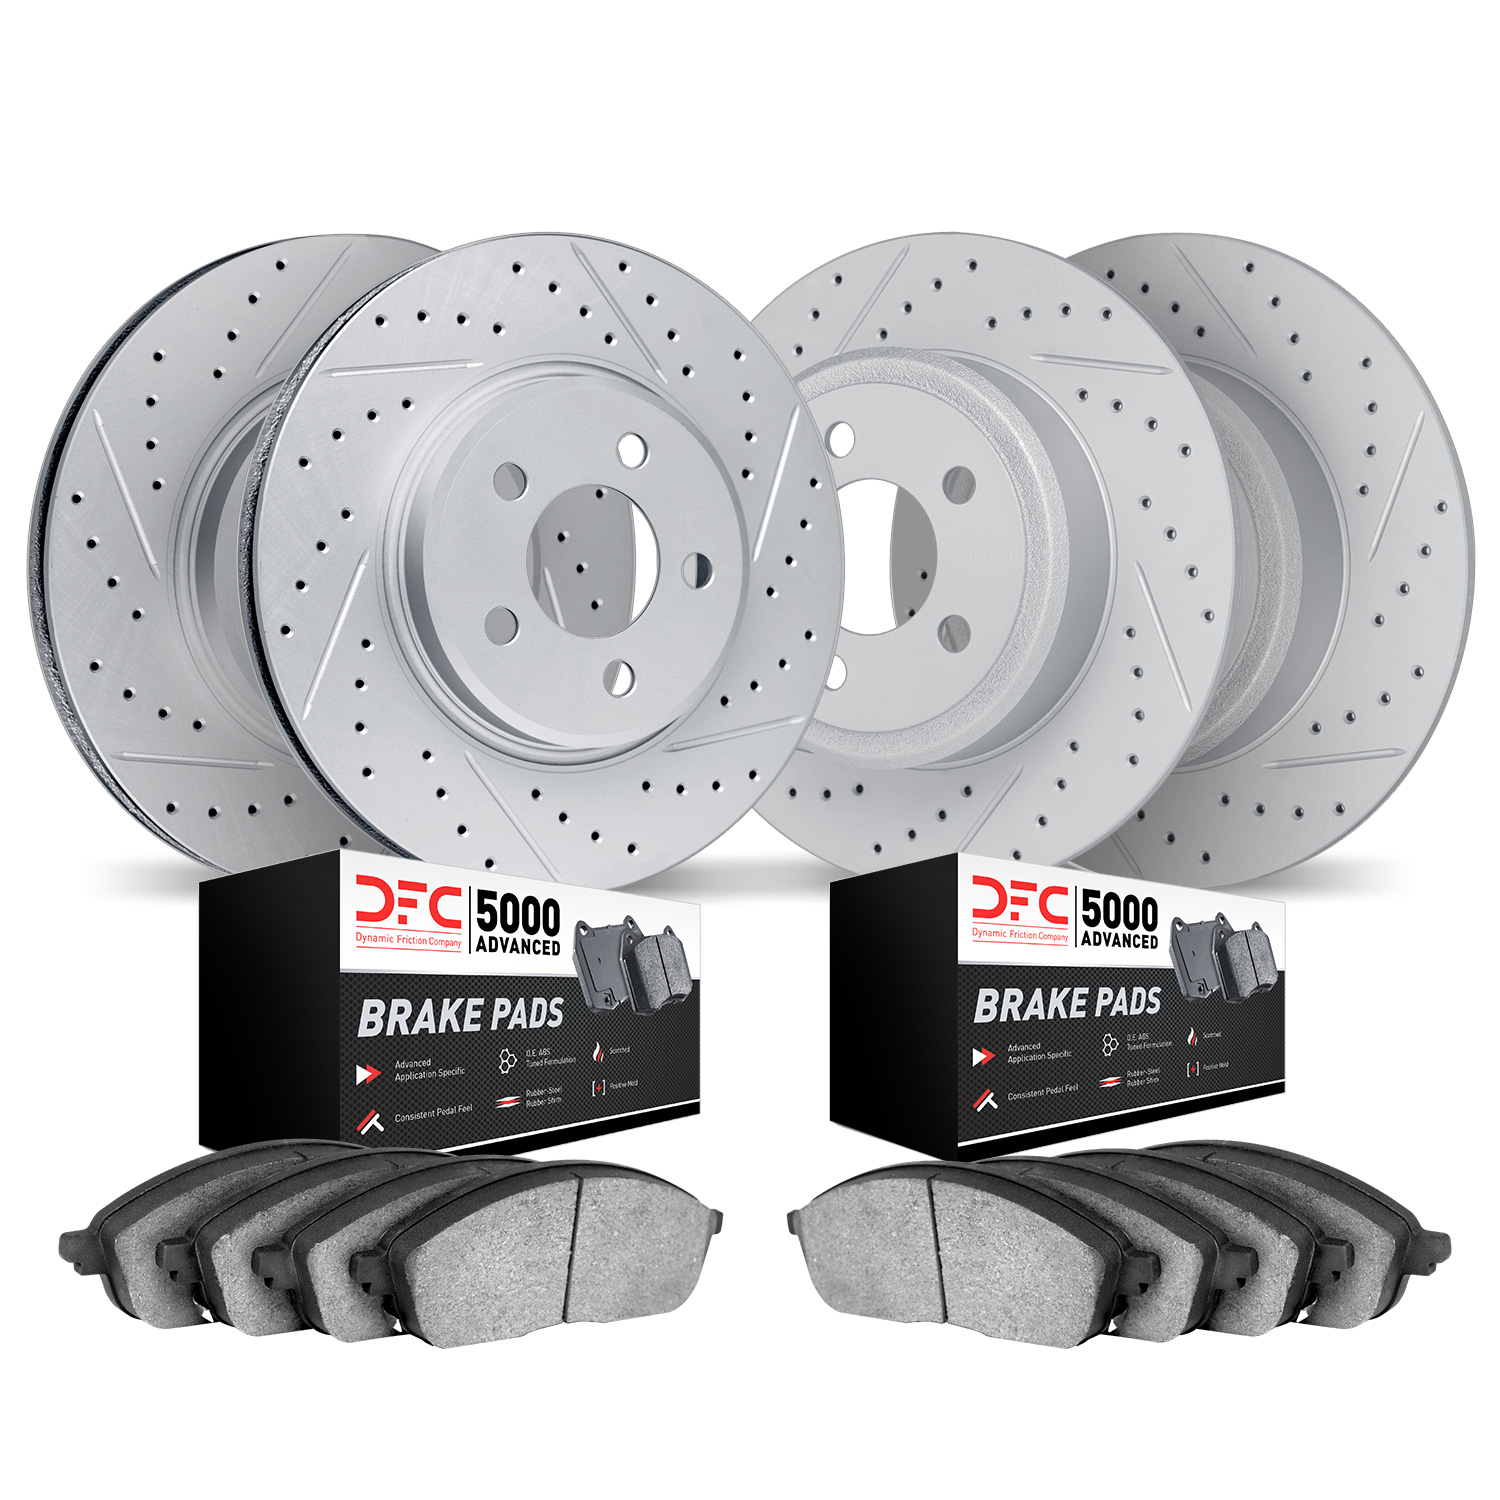 2504-54258 Geoperformance Drilled/Slotted Rotors w/5000 Advanced Brake Pads Kit, 1997-2002 Ford/Lincoln/Mercury/Mazda, Position: